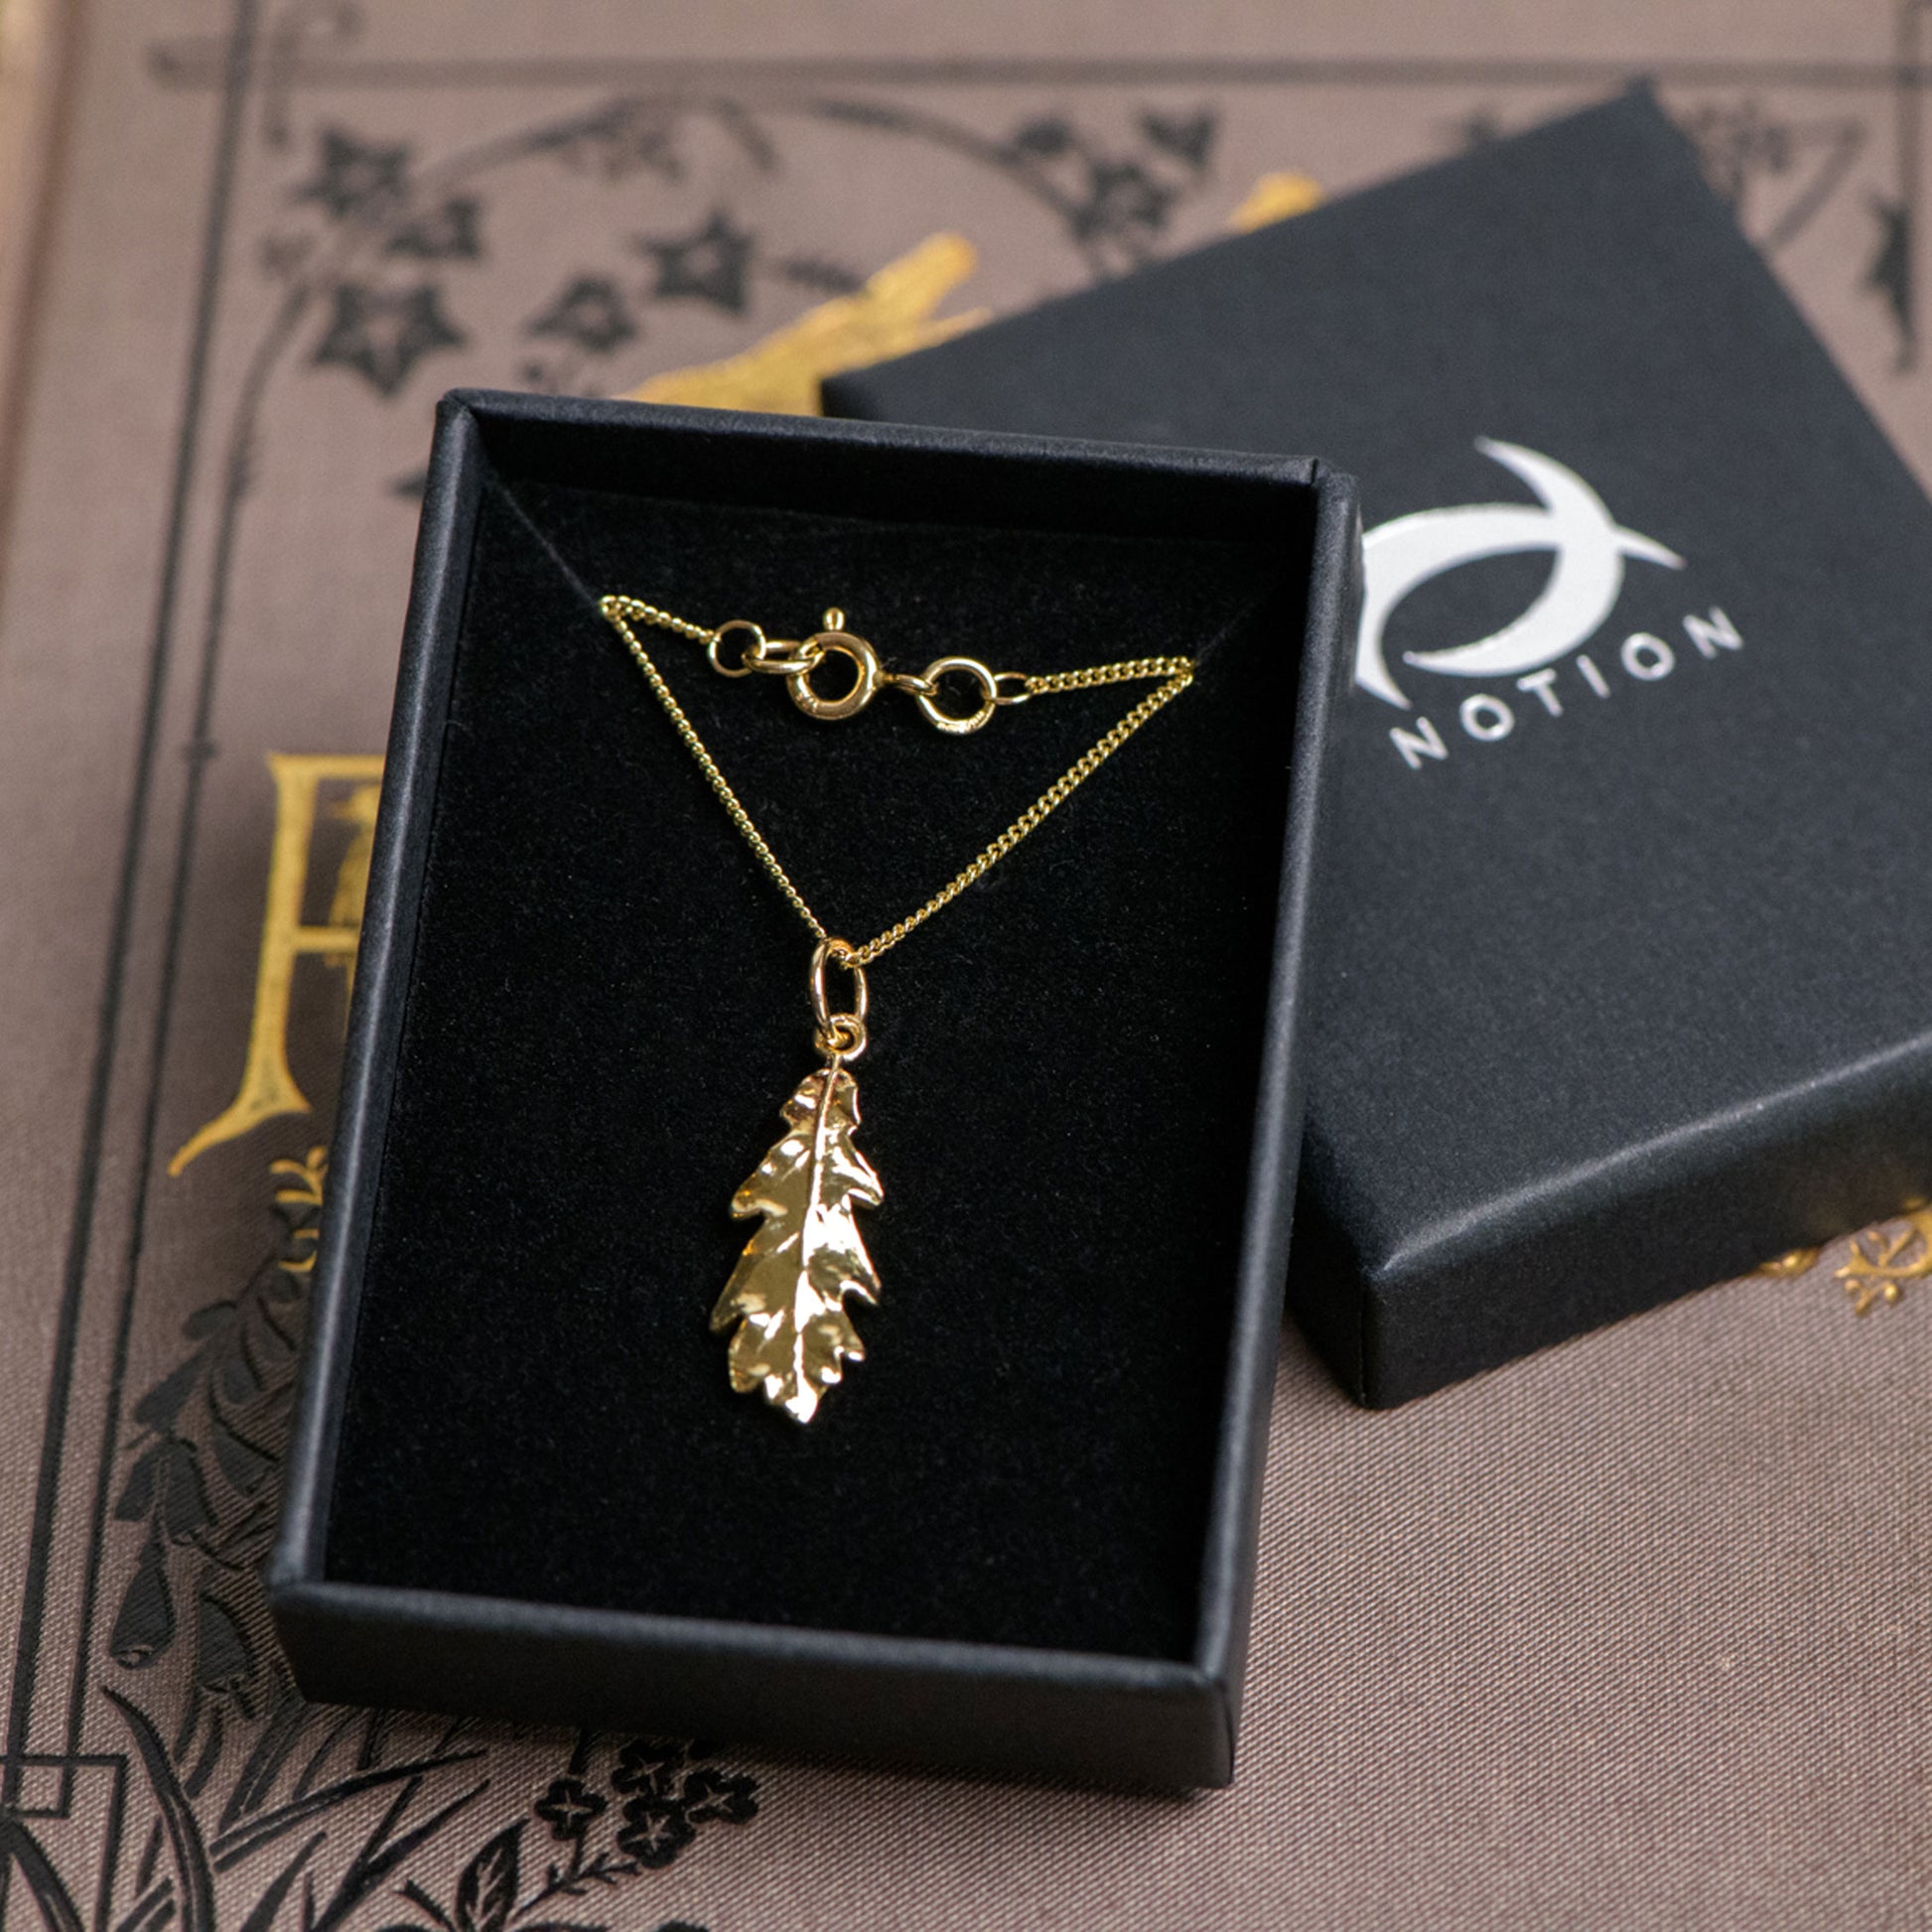 9ct gold leaf pendant by Notion Jewellery